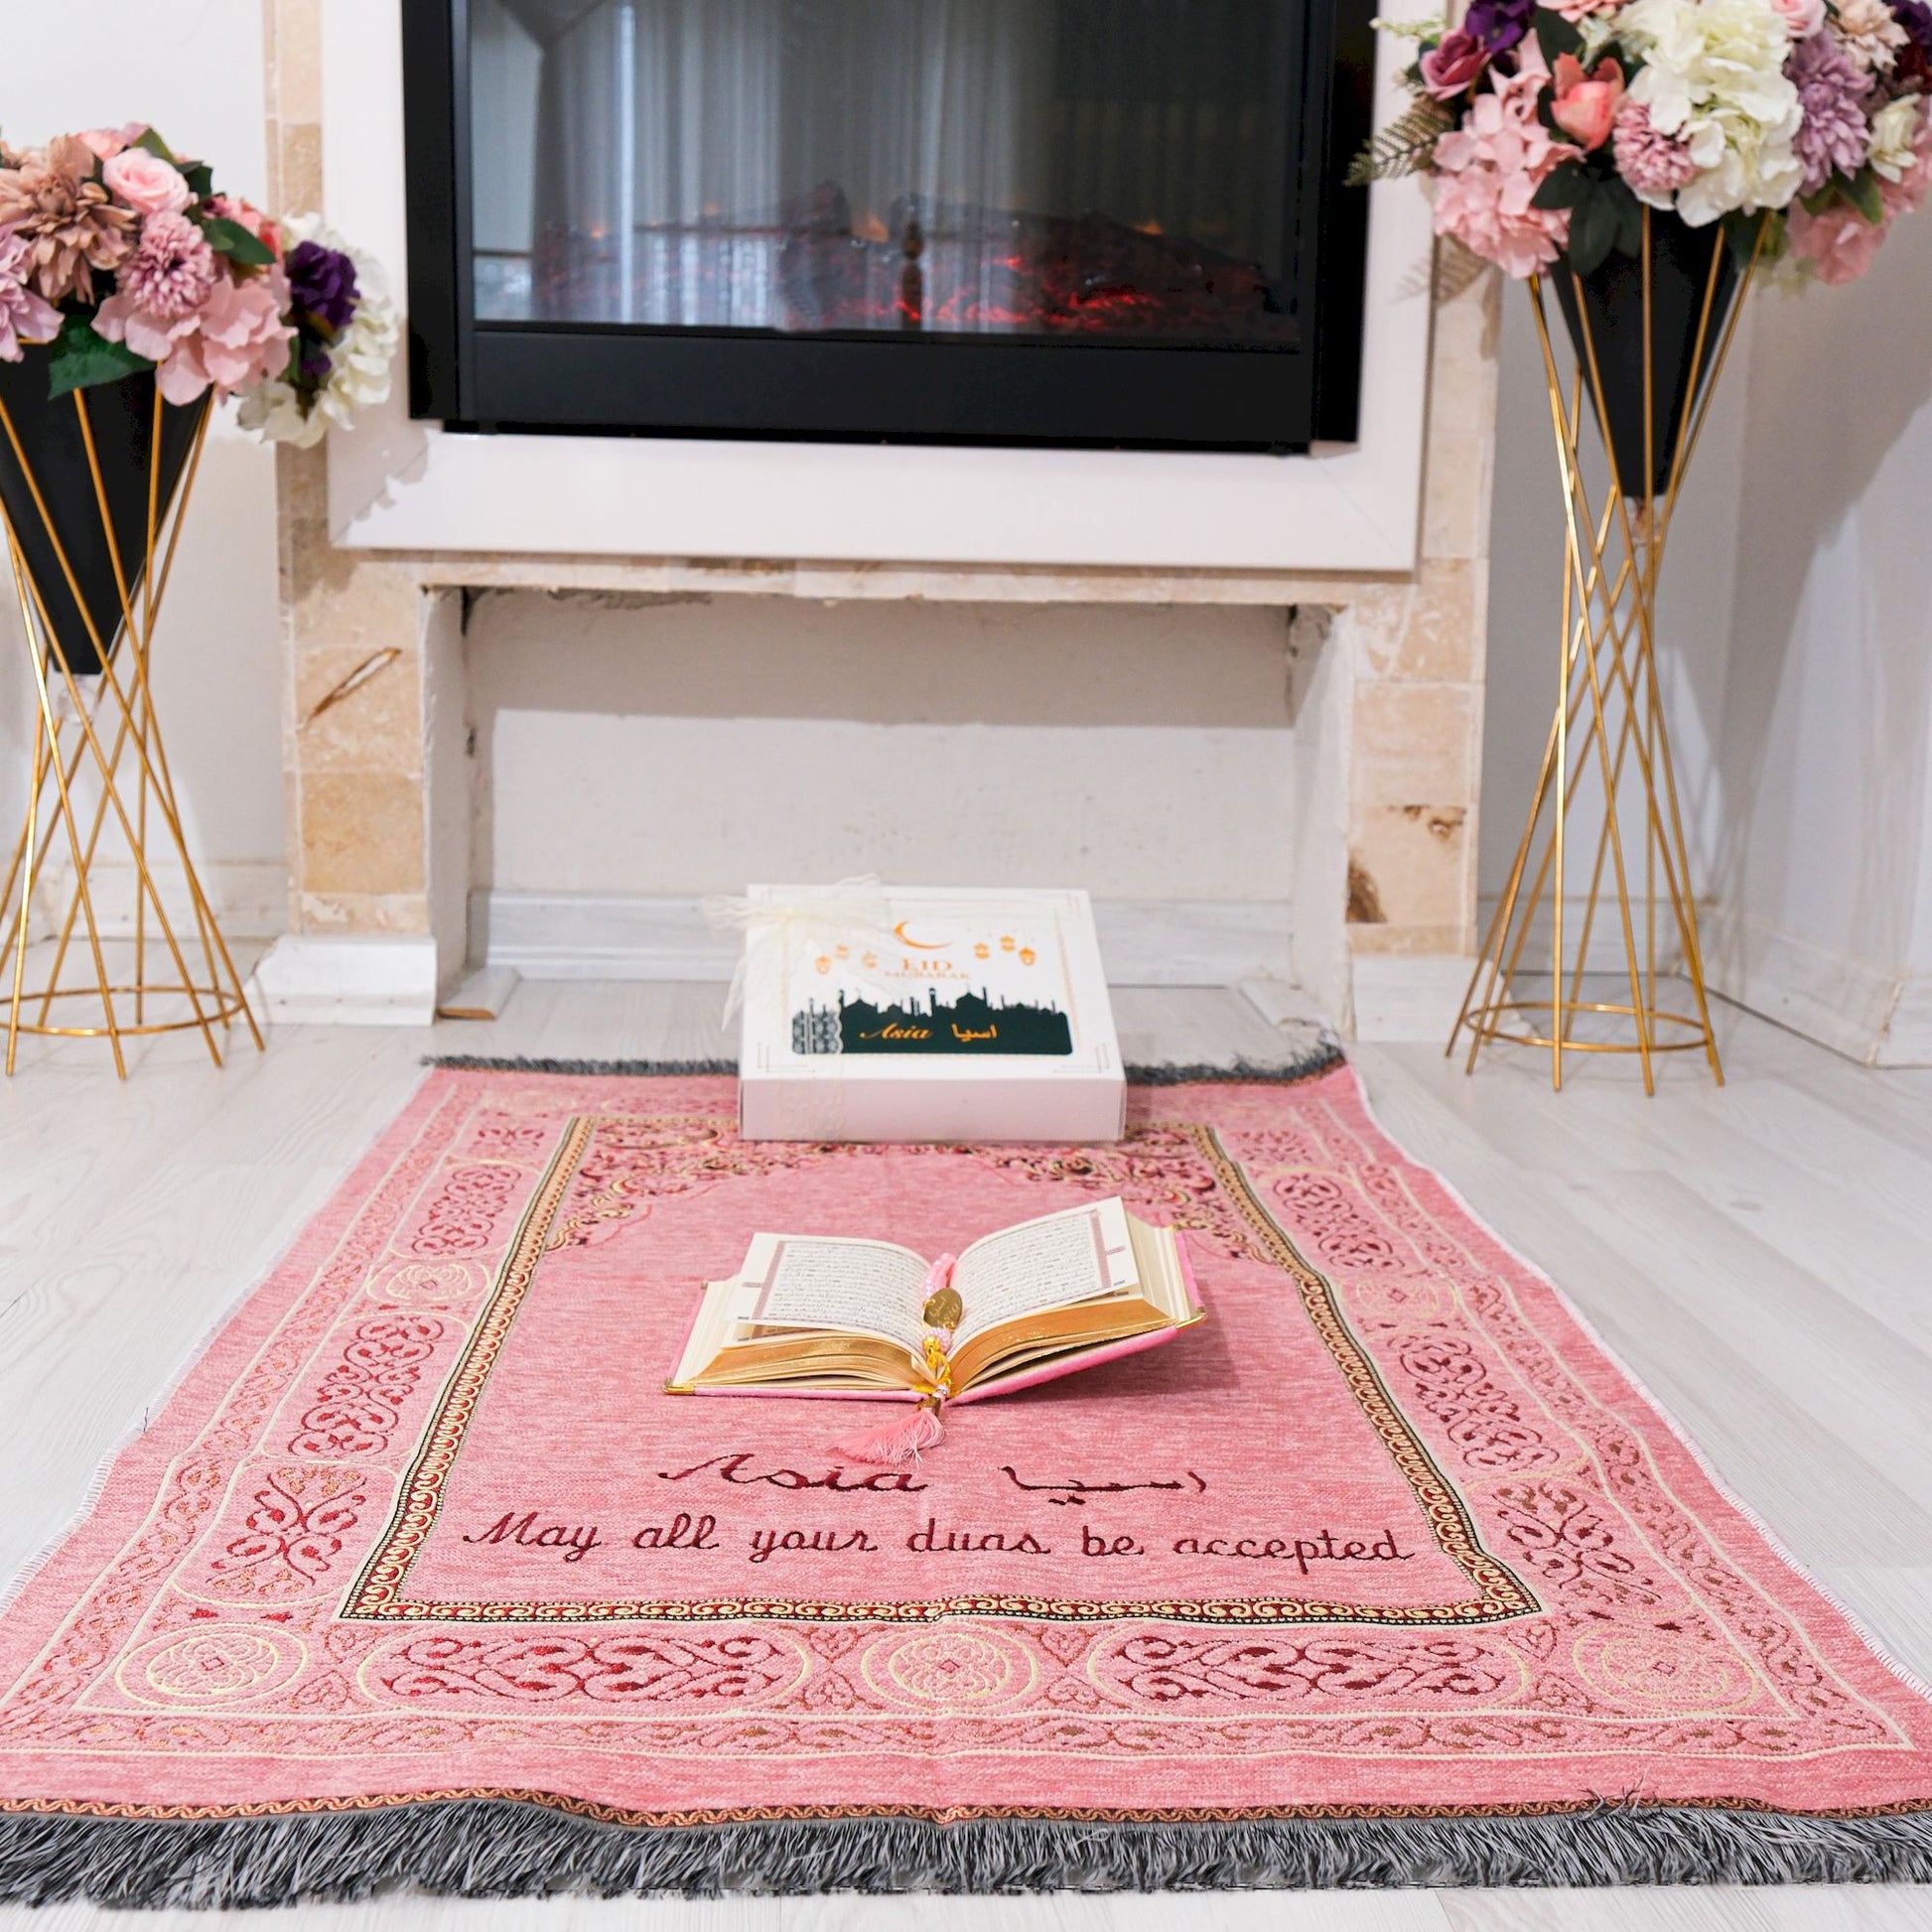 Personalized Peaceful Prayer Mat Quran Tasbeeh Islamic Muslim Gift Set - Islamic Elite Favors is a handmade gift shop offering a wide variety of unique and personalized gifts for all occasions. Whether you're looking for the perfect Ramadan, Eid, Hajj, wedding gift or something special for a birthday, baby shower or anniversary, we have something for everyone. High quality, made with love.